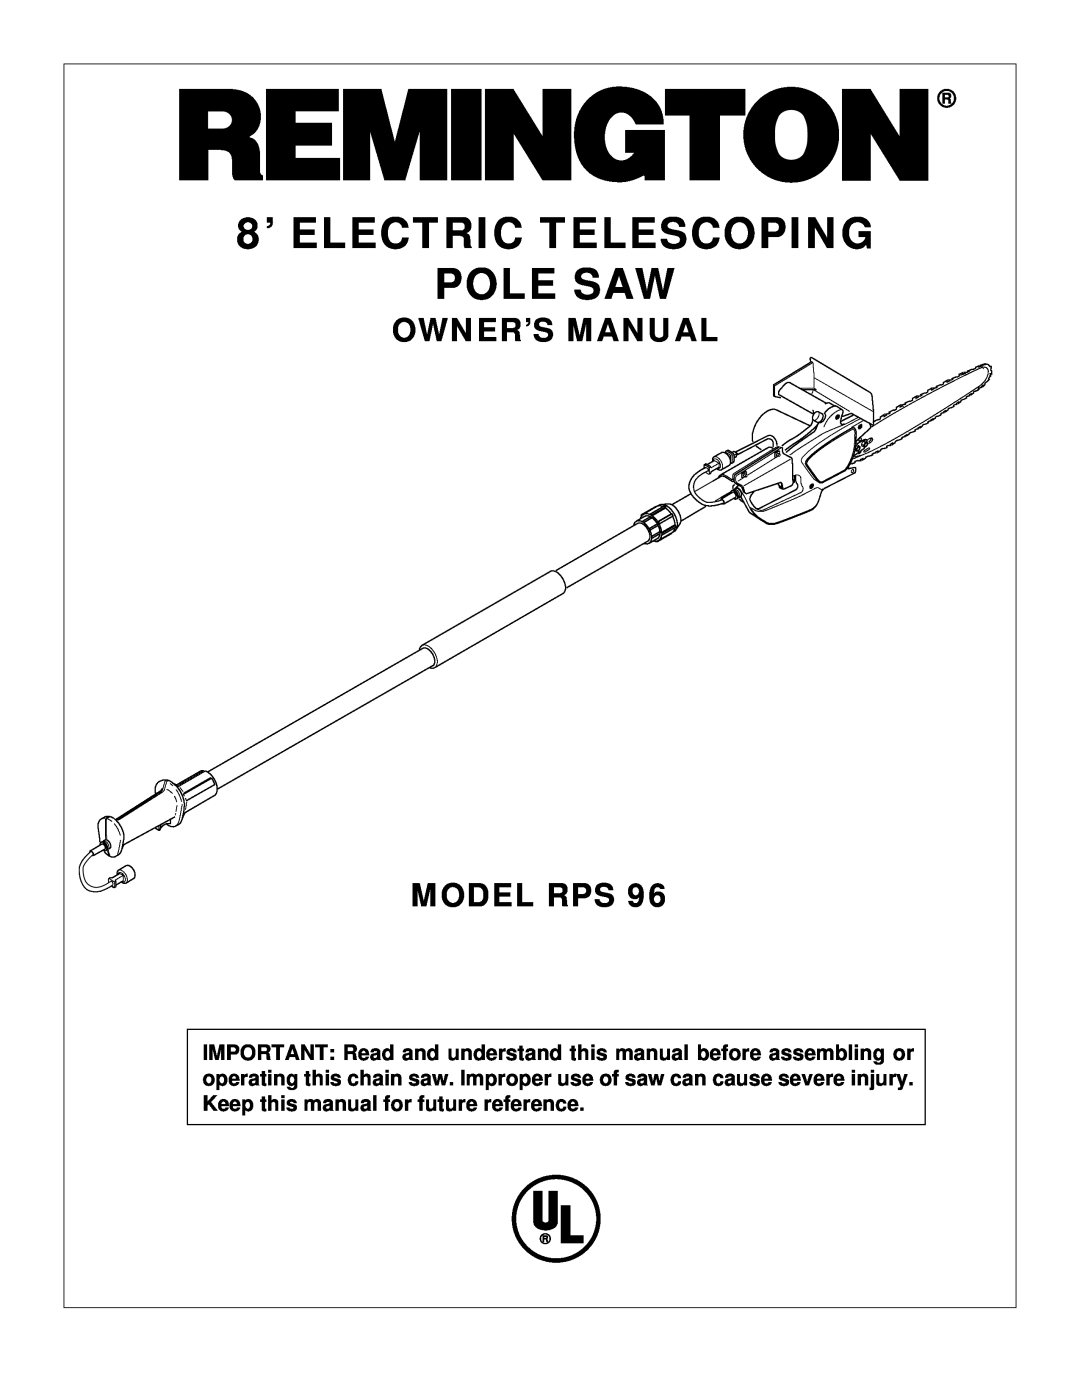 Remington RPS 96 owner manual 8’ ELECTRIC TELESCOPING POLE SAW 